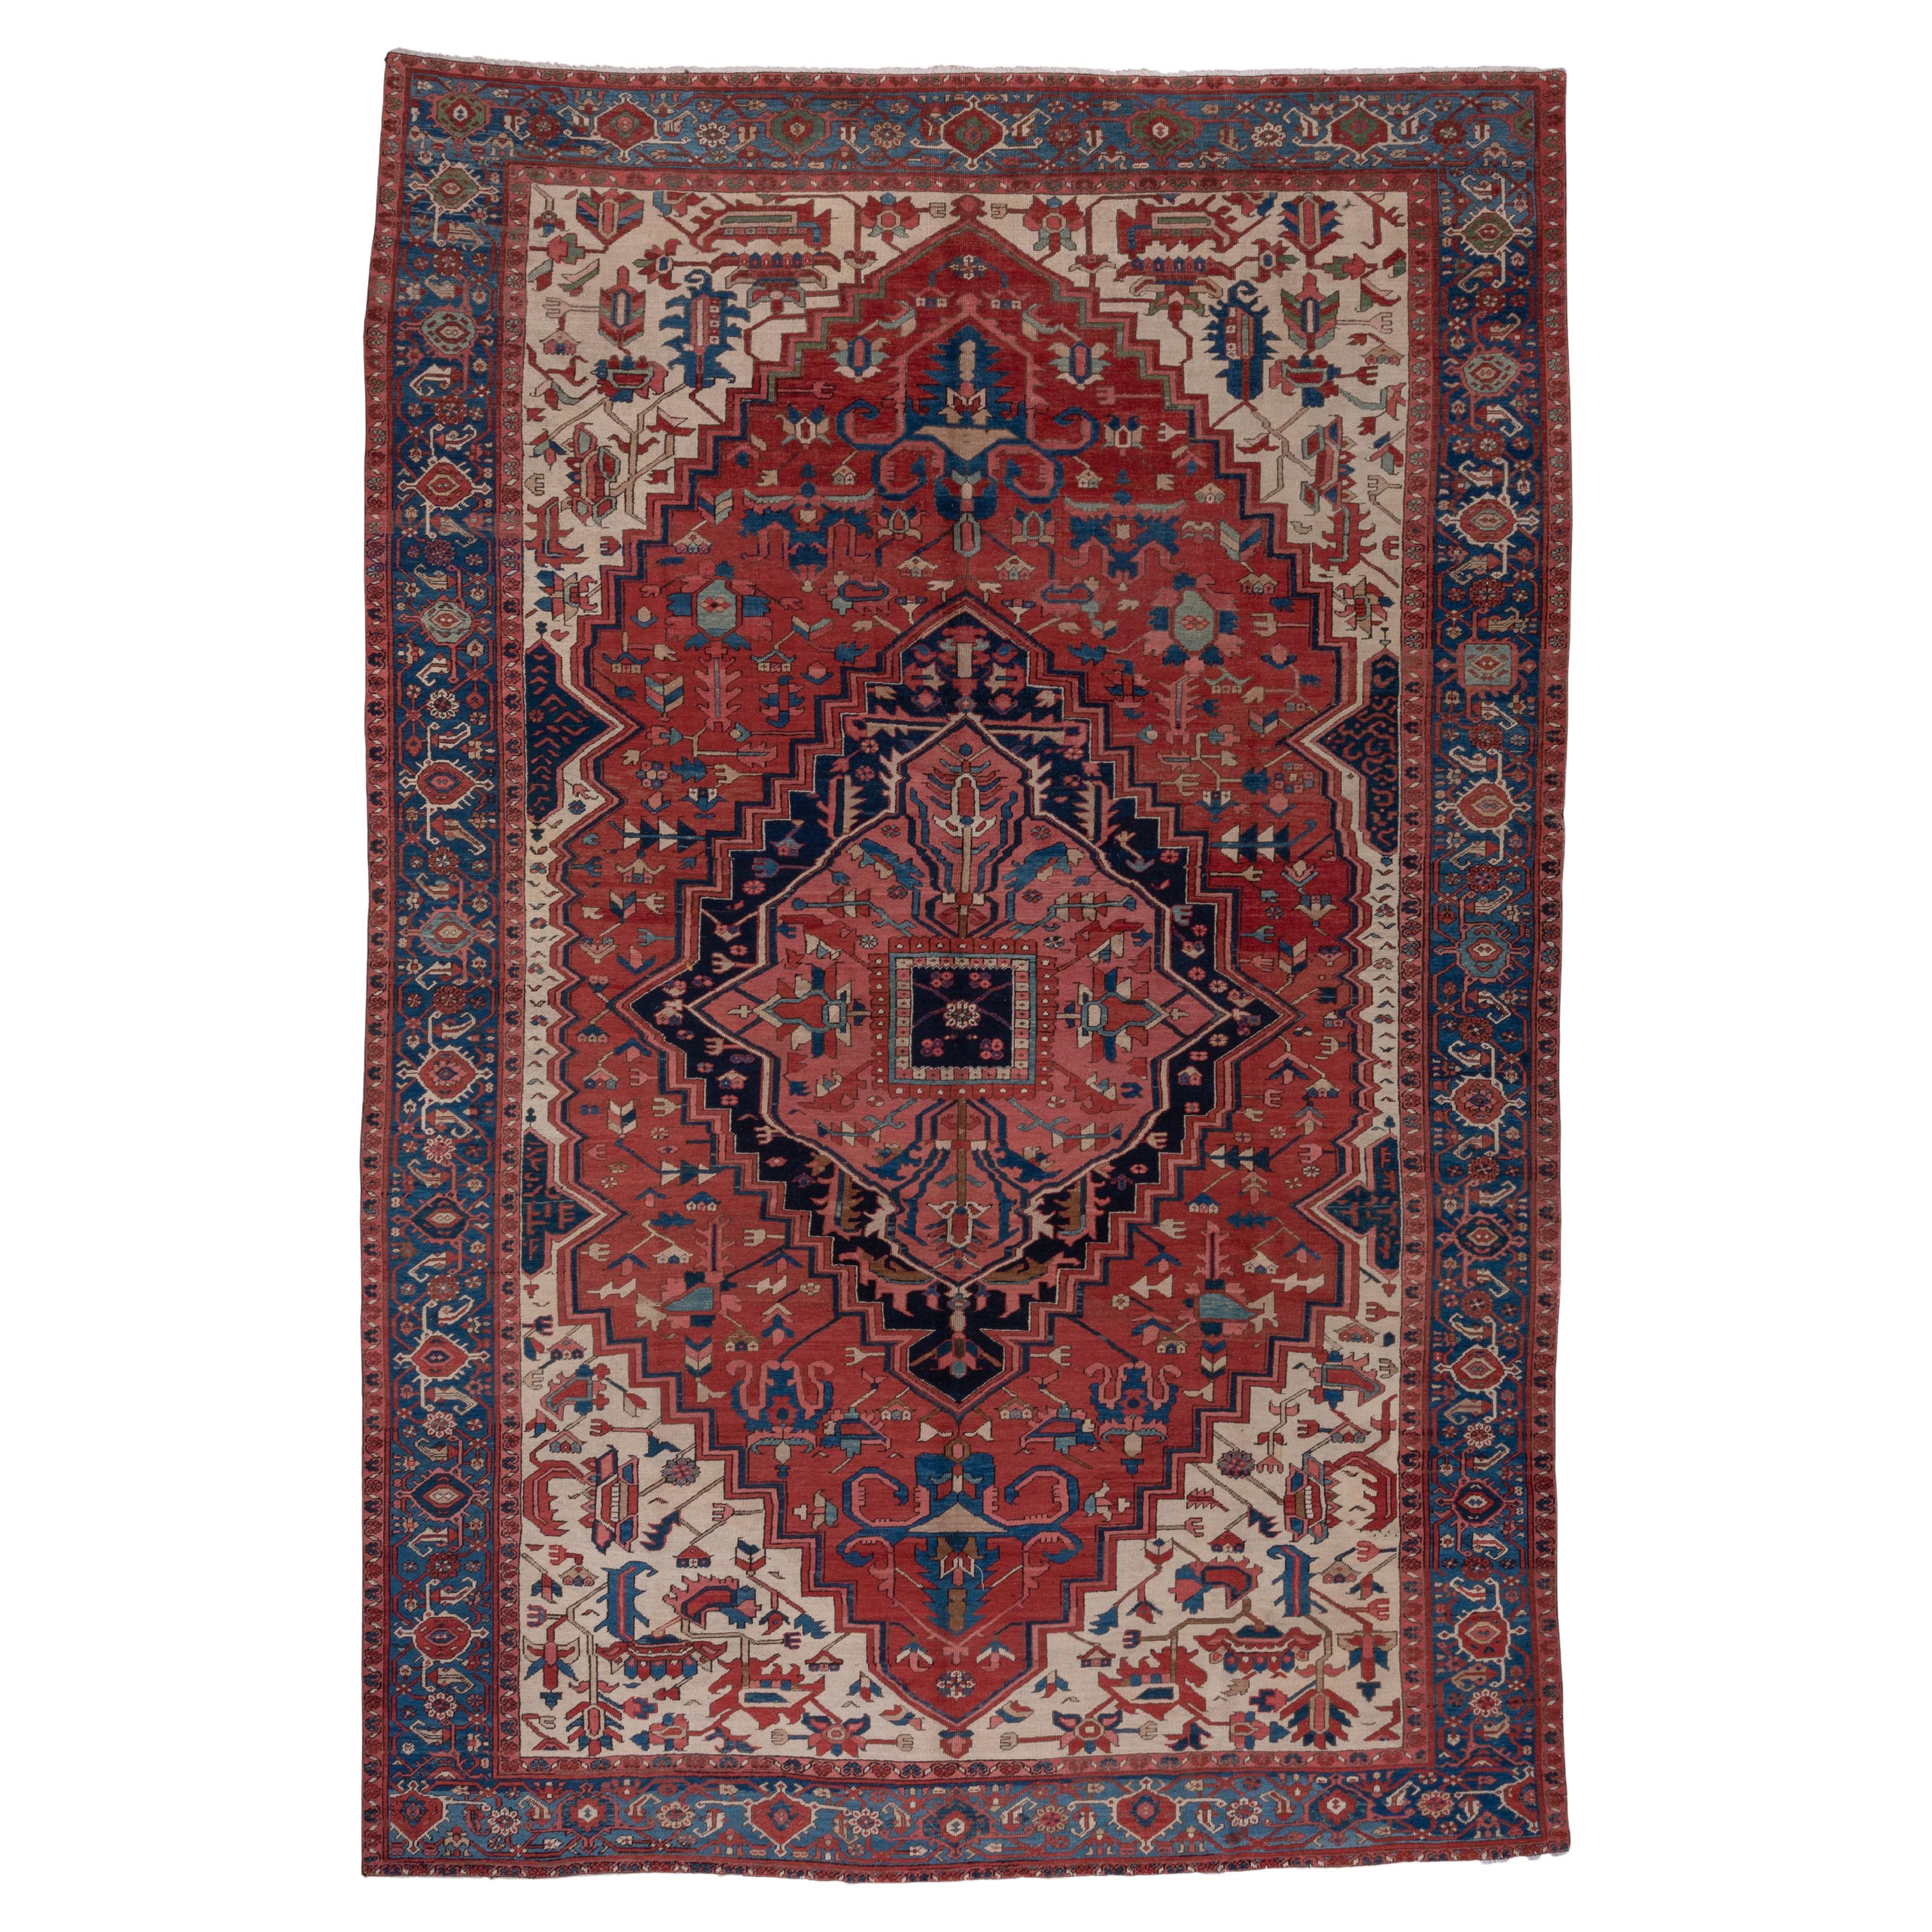 Antique Serapi Rug with Cream and Red Field and Corner Foliage